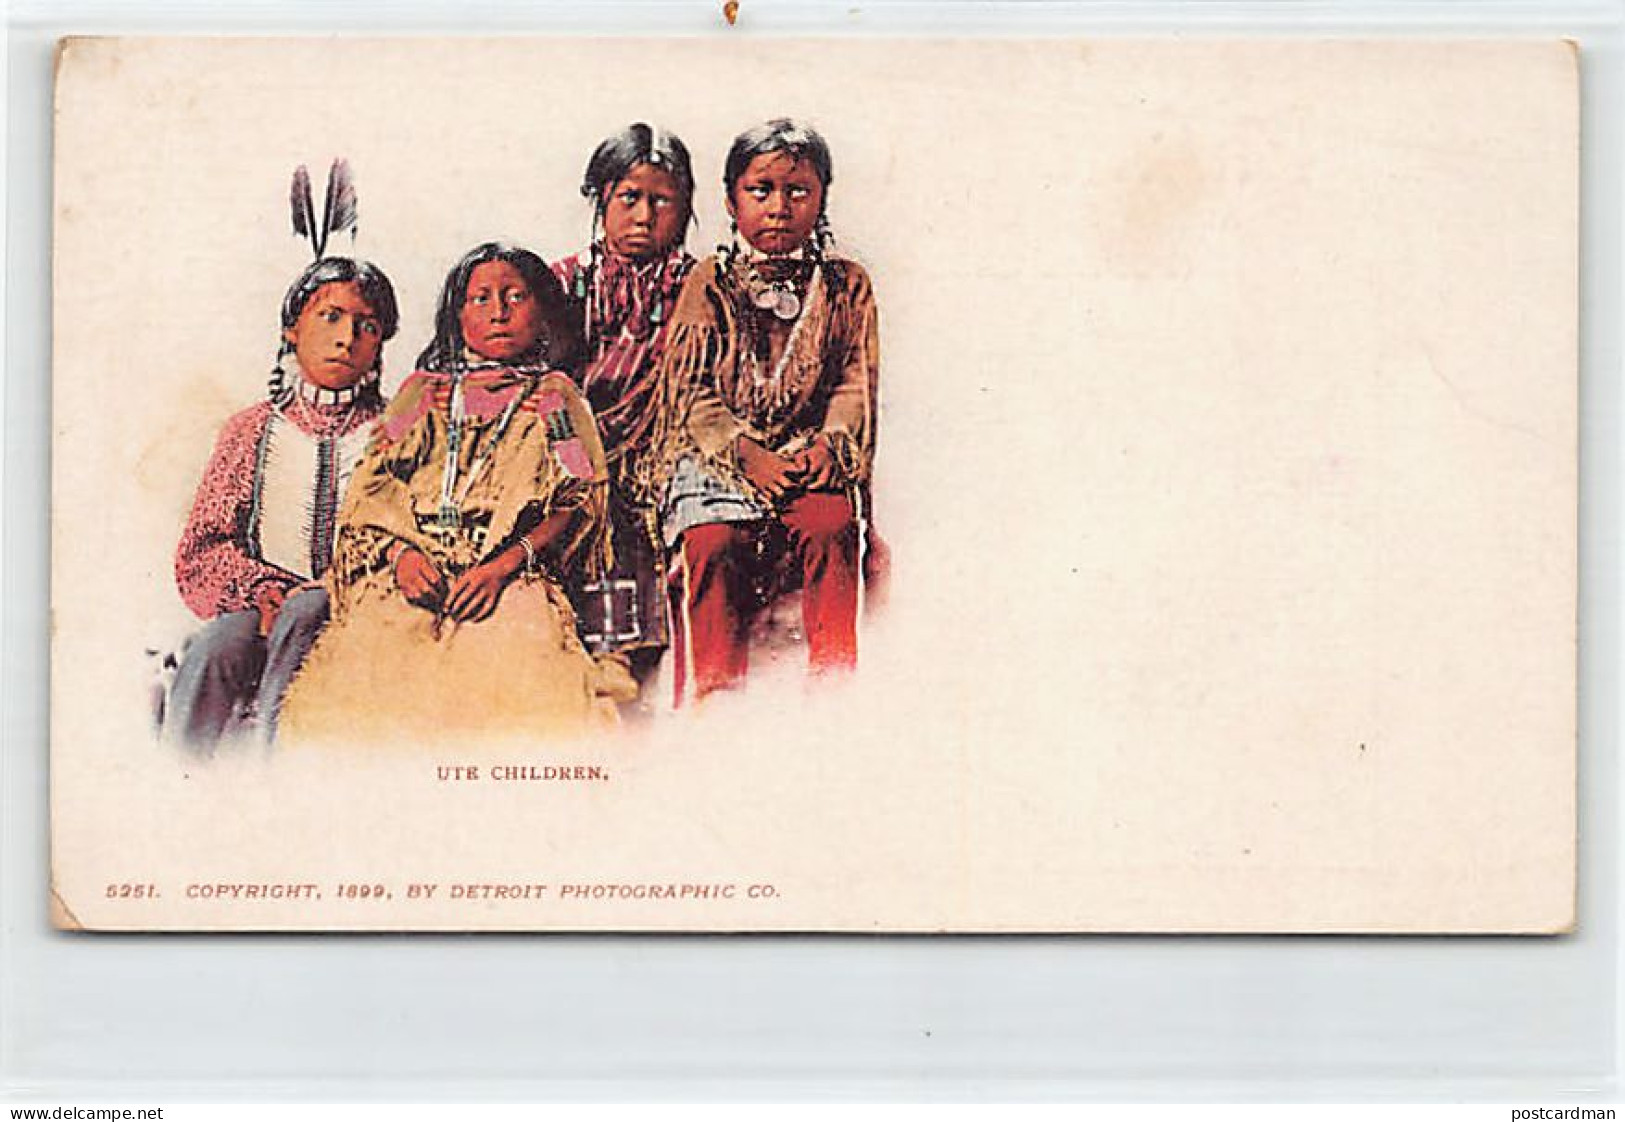 Usa - Native Americans - Ute Children - Publ. Detroit Photographic Co. 5251 - PRIVATE MAILING CARD - Native Americans